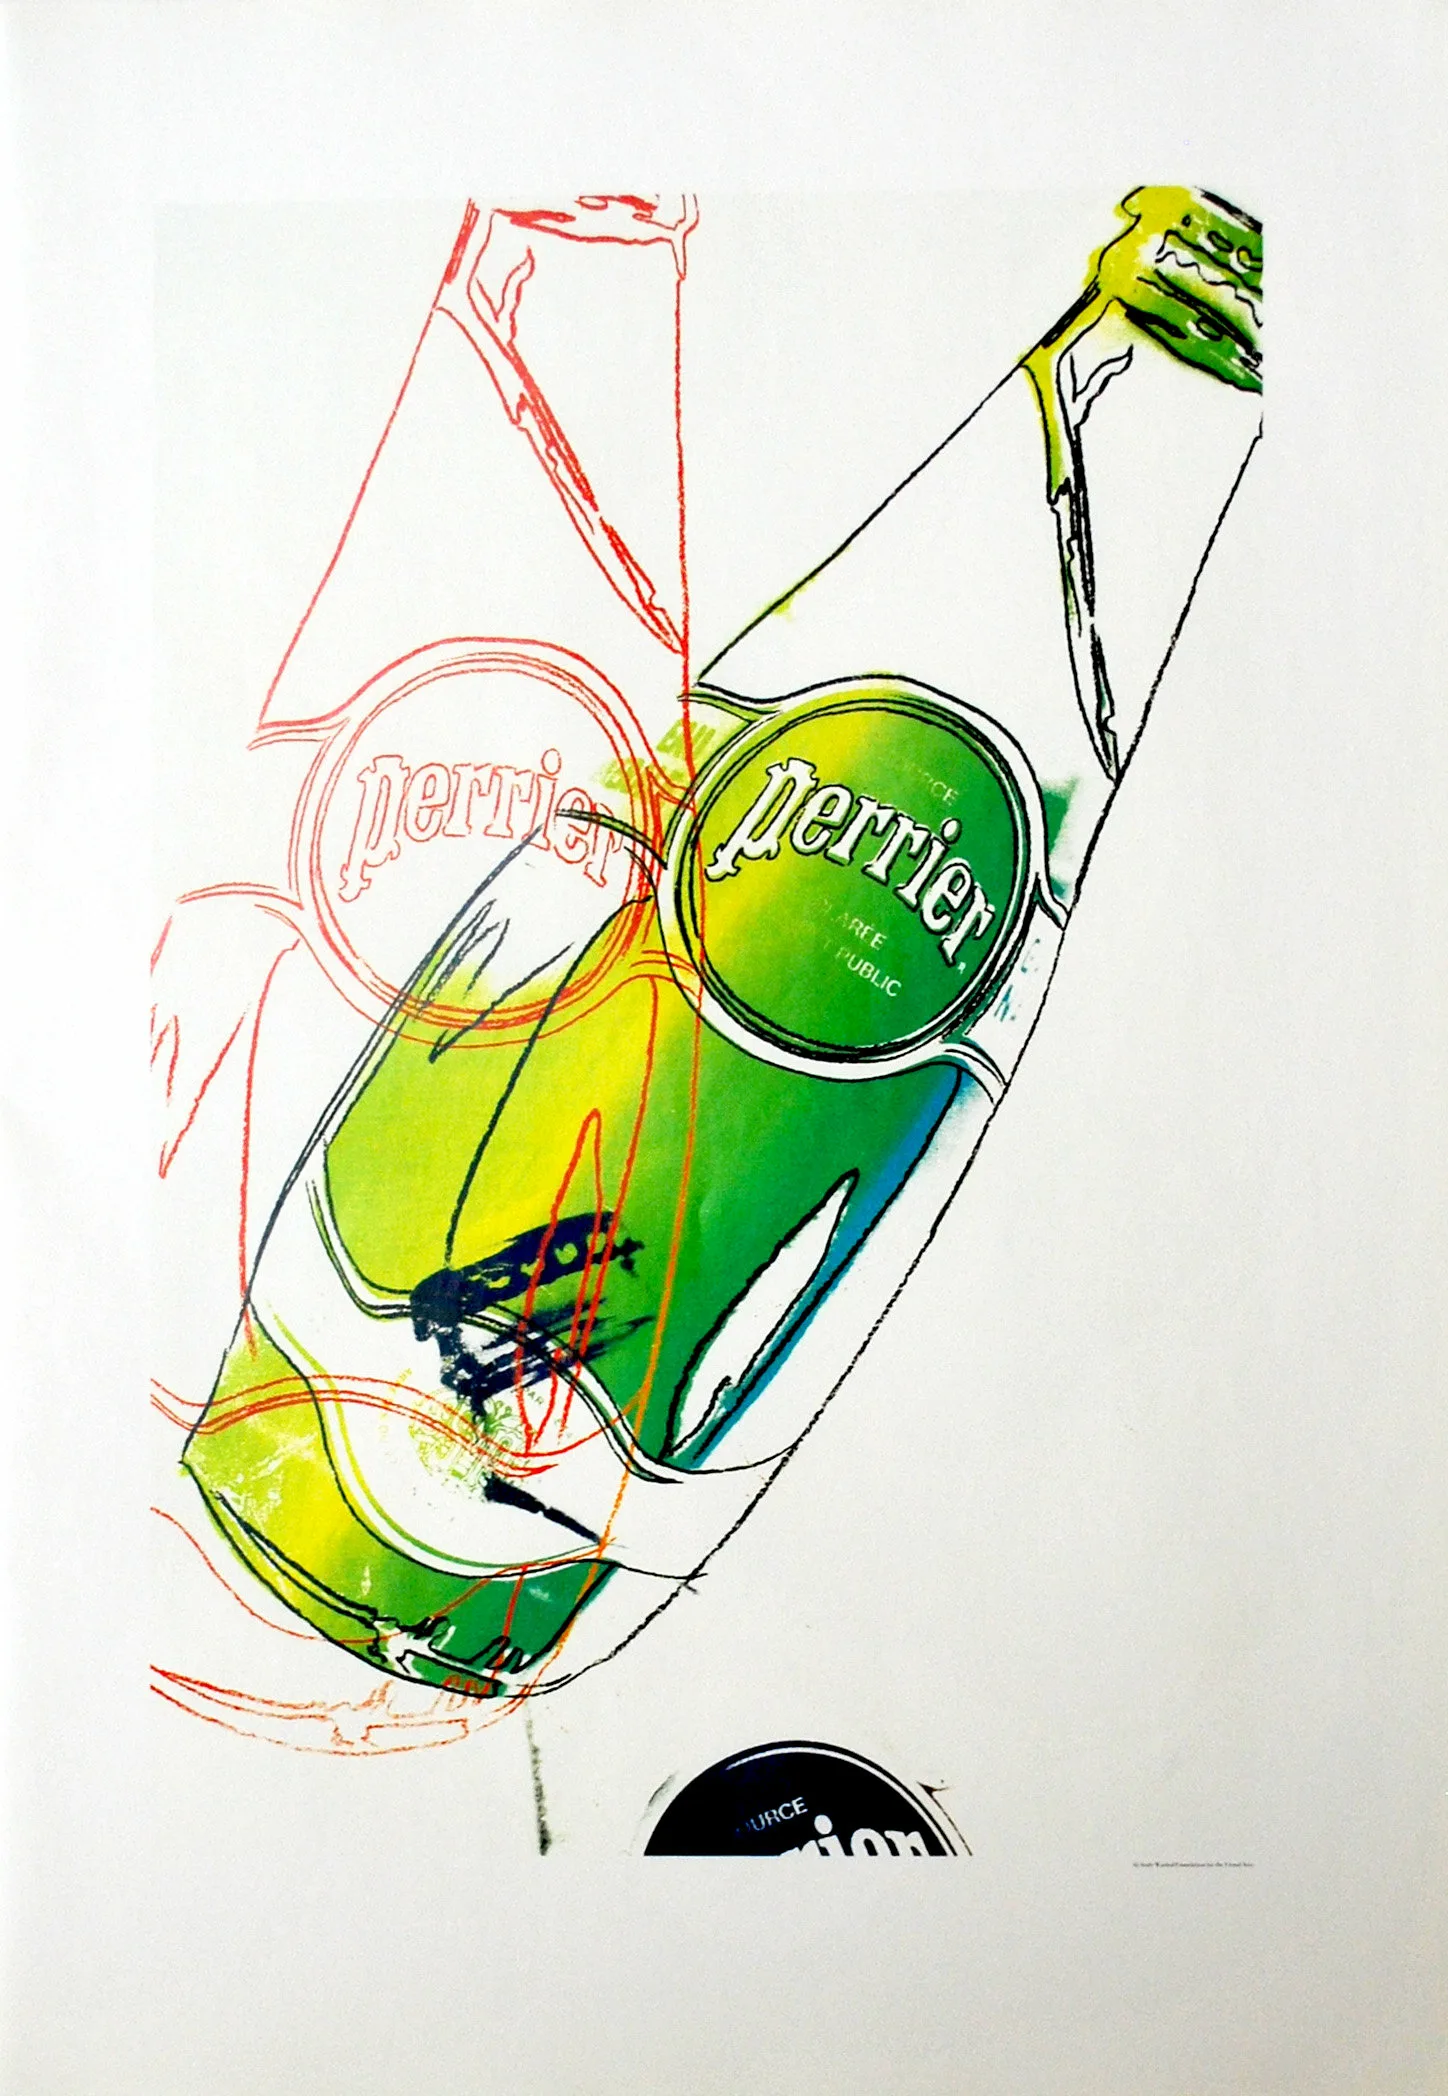 From the pop art collection of Perrier by Andy Warhol